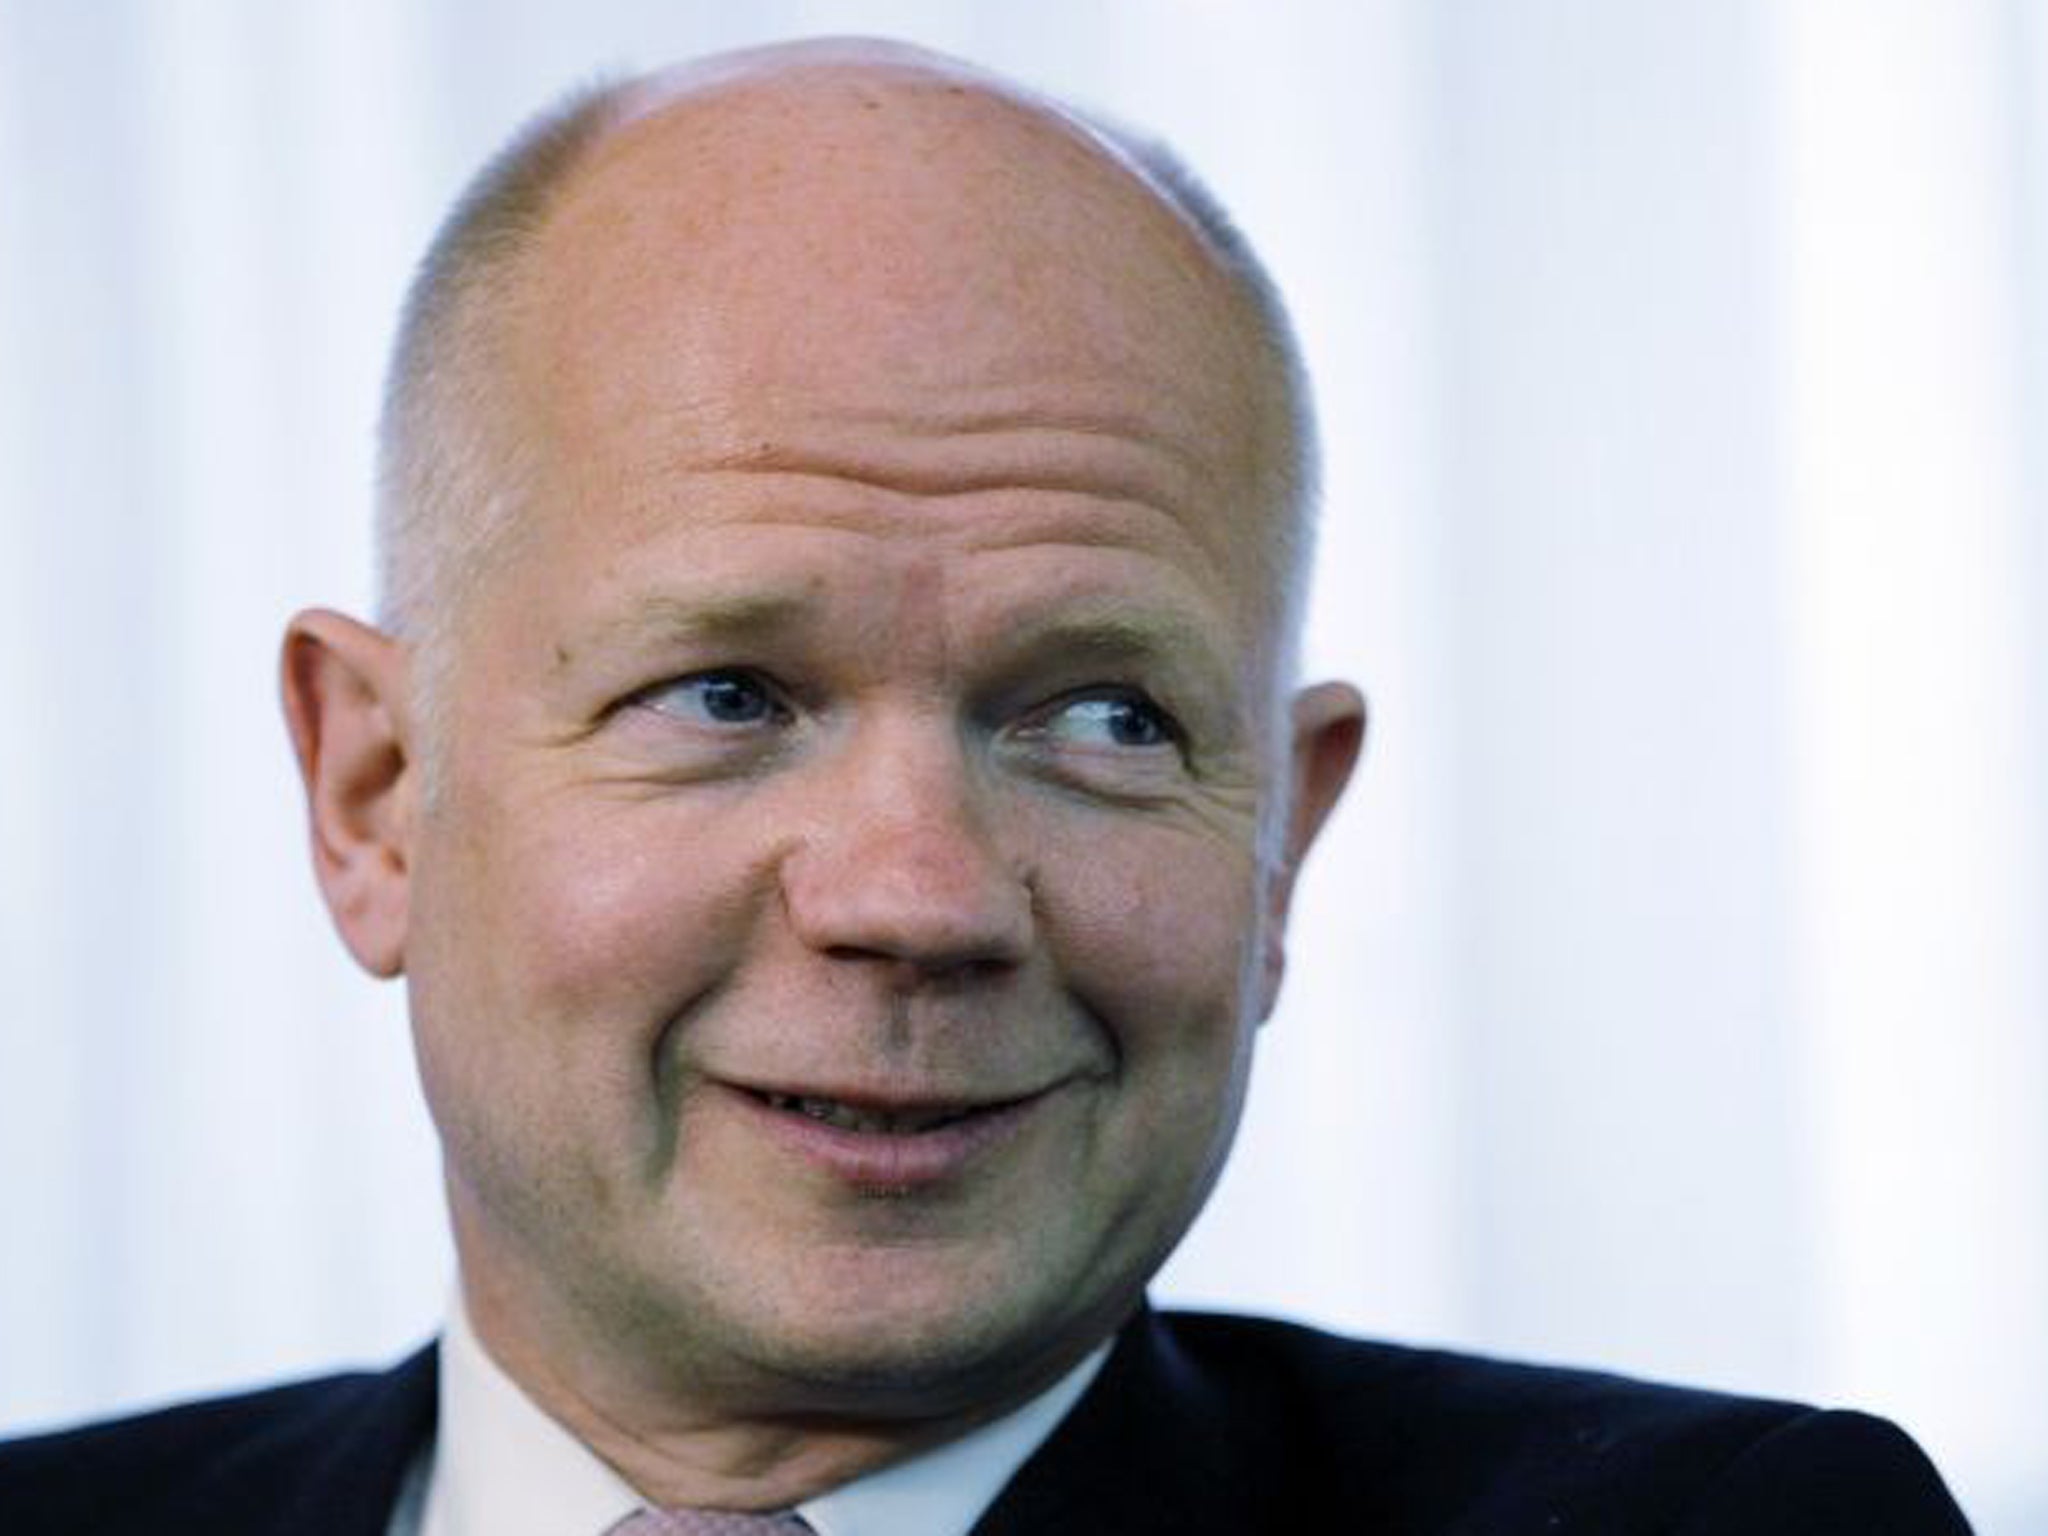 Britain is unsure whether to arm Syrian rebels, says William Hague